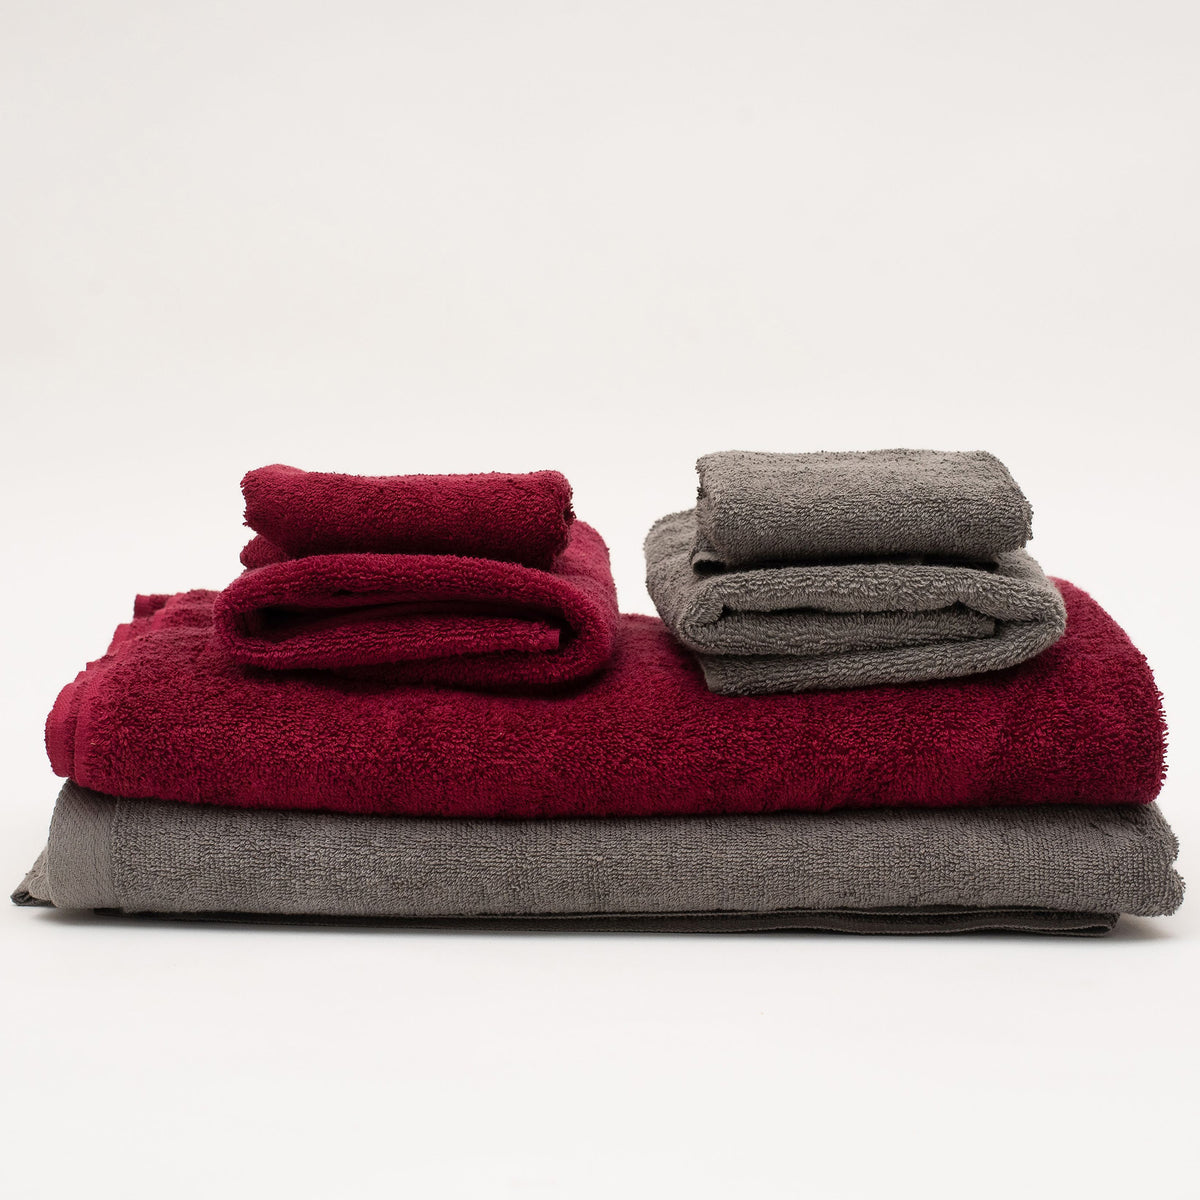 Cranberry &amp; Gray - Colorful 100% Cotton Towels - American Blanket Company